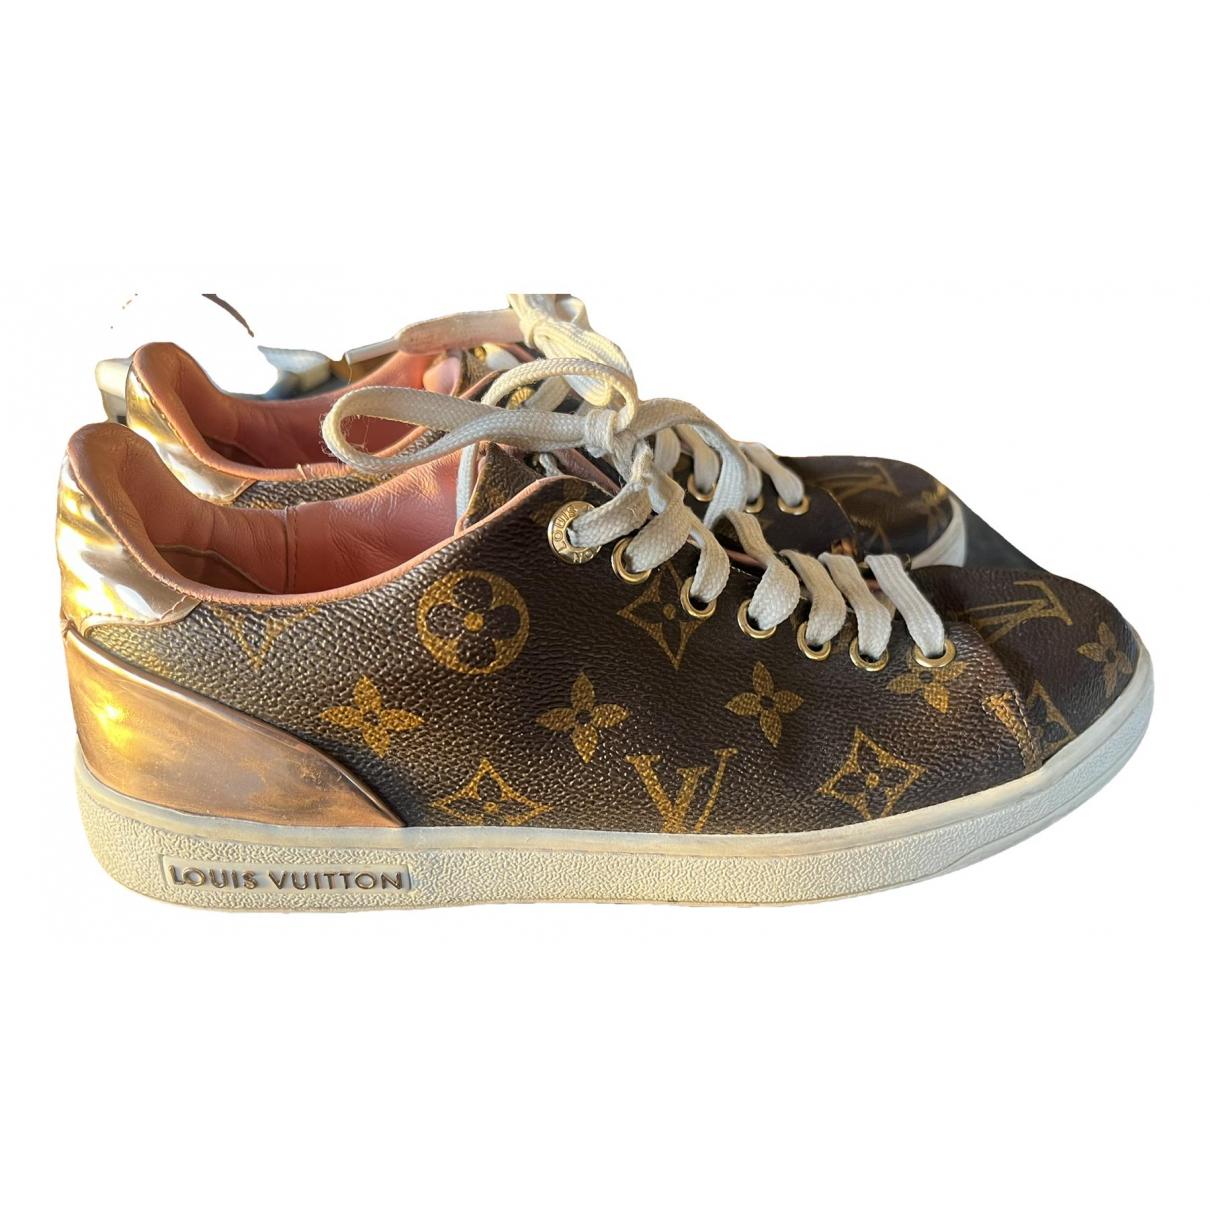 Sneaker Frontrow Louis Vuitton Top Sellers, SAVE 45% 